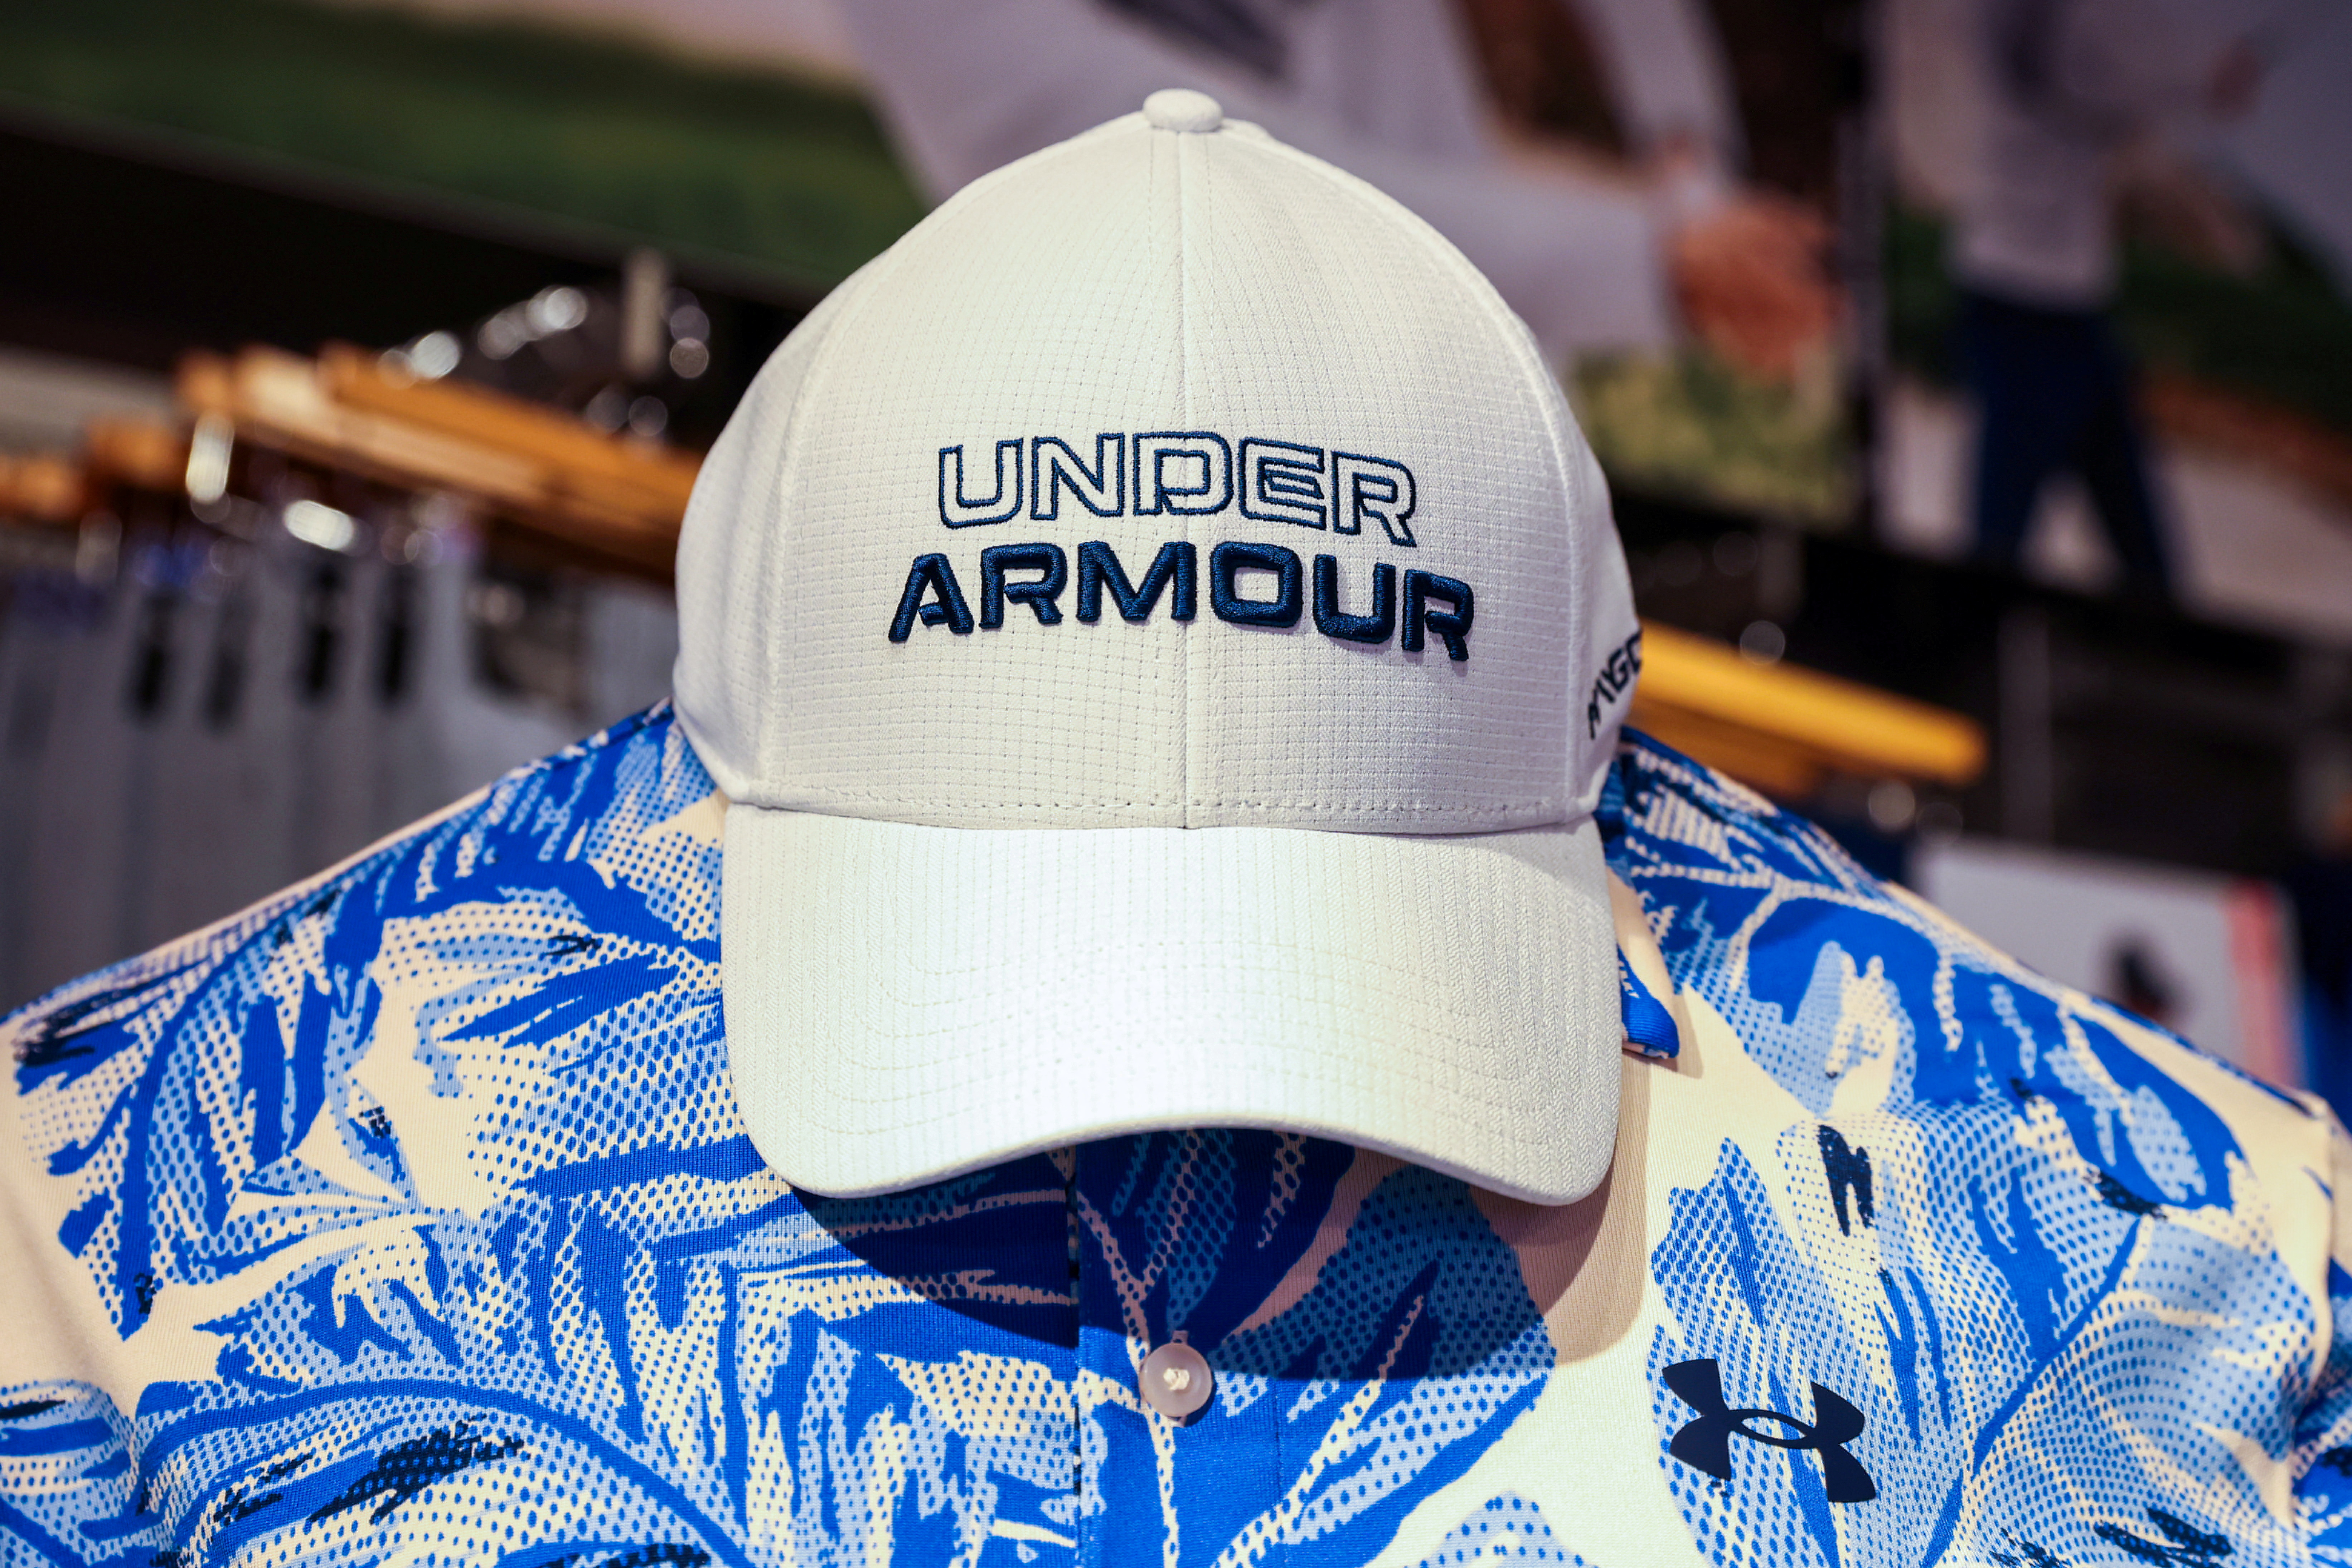 Under Armour cuts on demand, higher Reuters